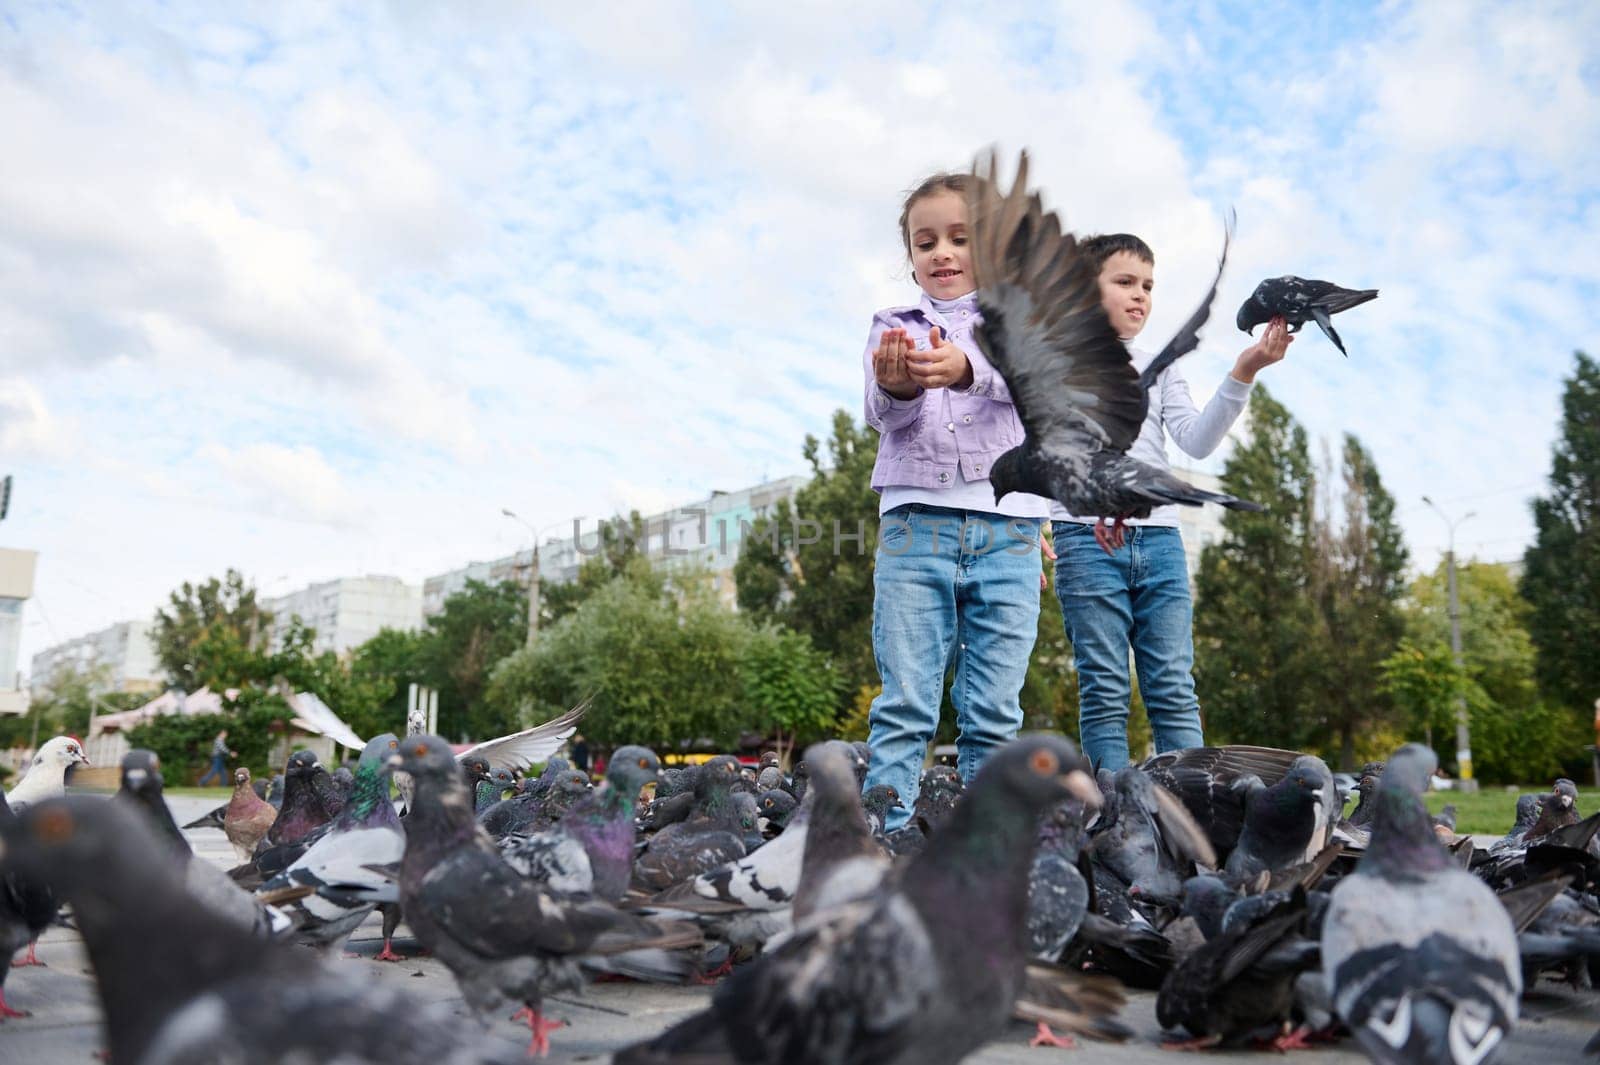 Adorable children boy and girl, feeding rock pigeons crowding the street with discarded food in the city square. The concept of happy carefree childhood and instilling love for nature and animals